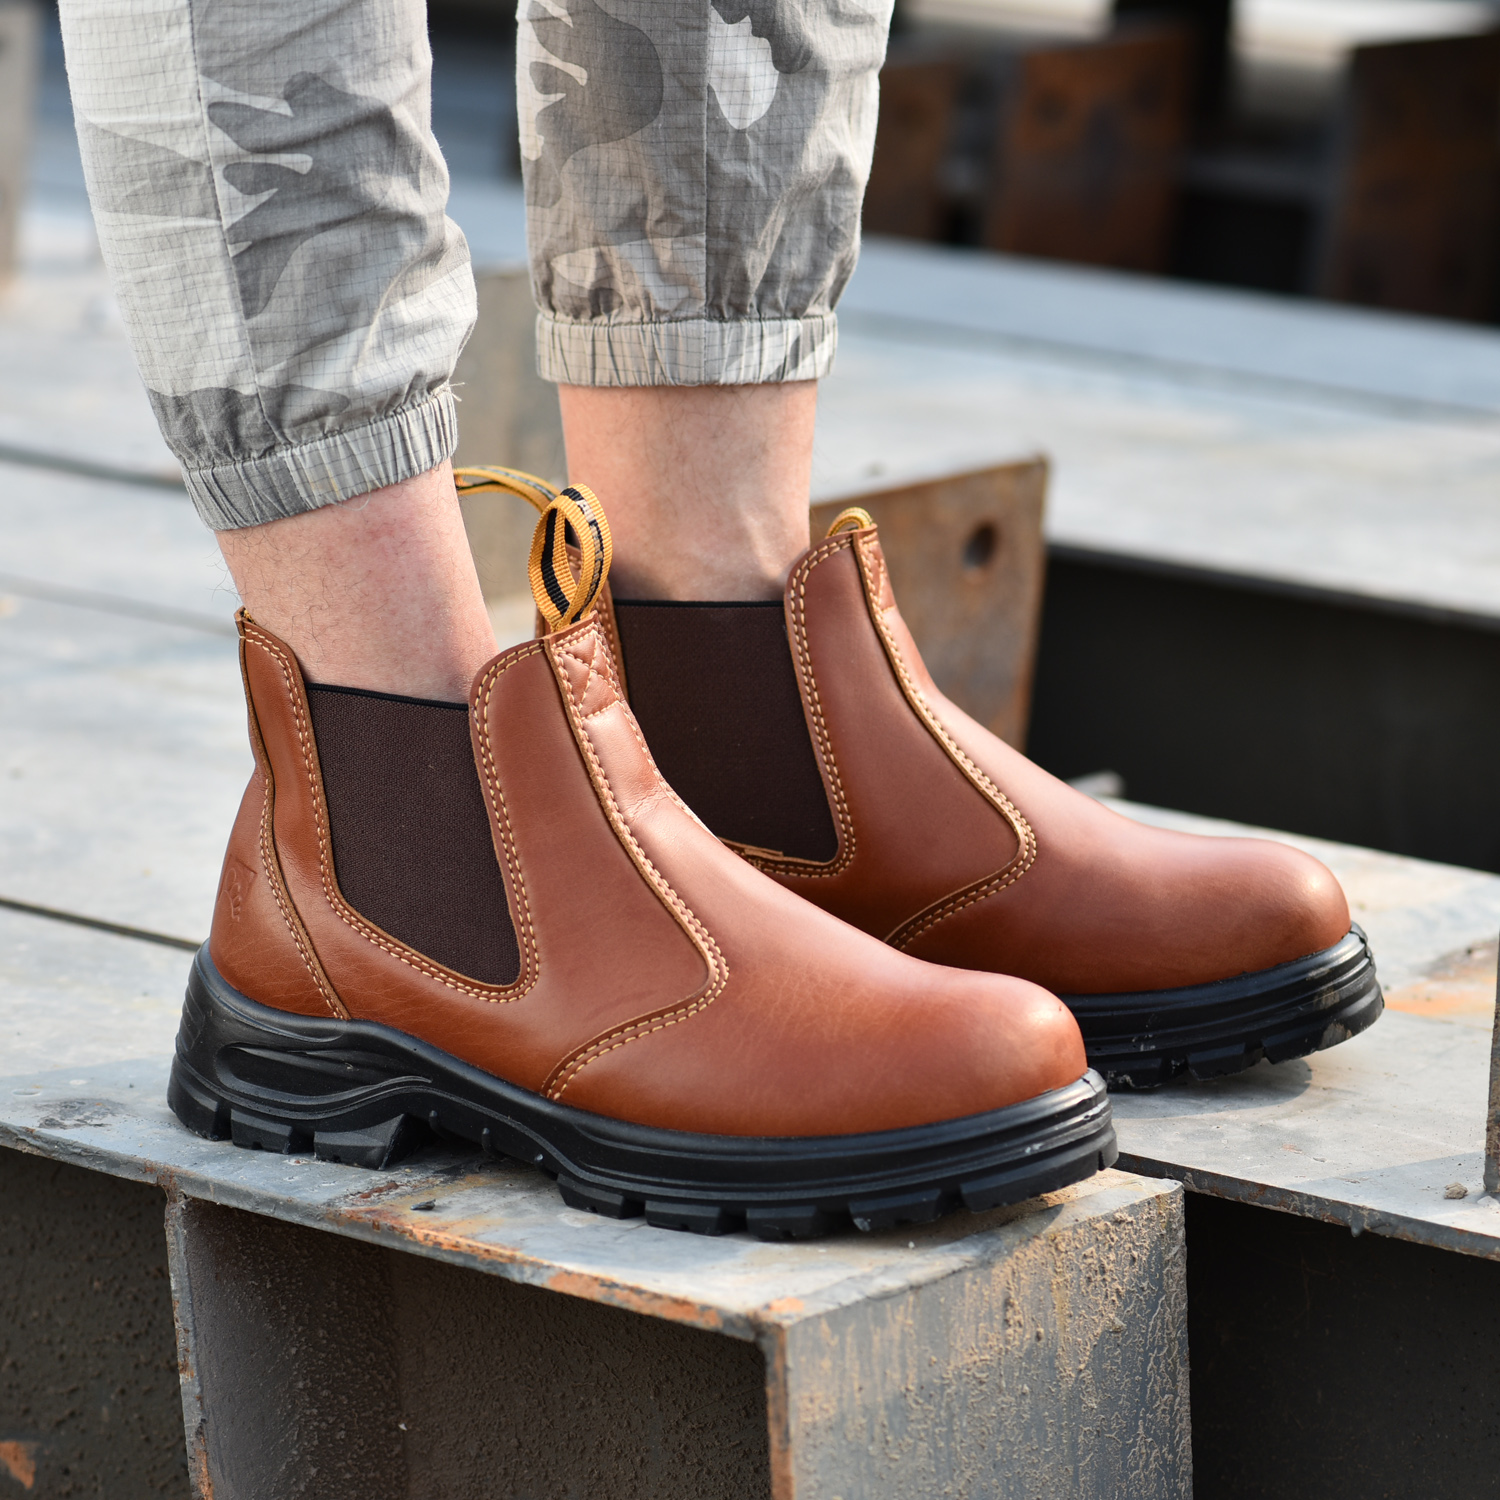 Brown Color Chelsea Work Boots M-8025 